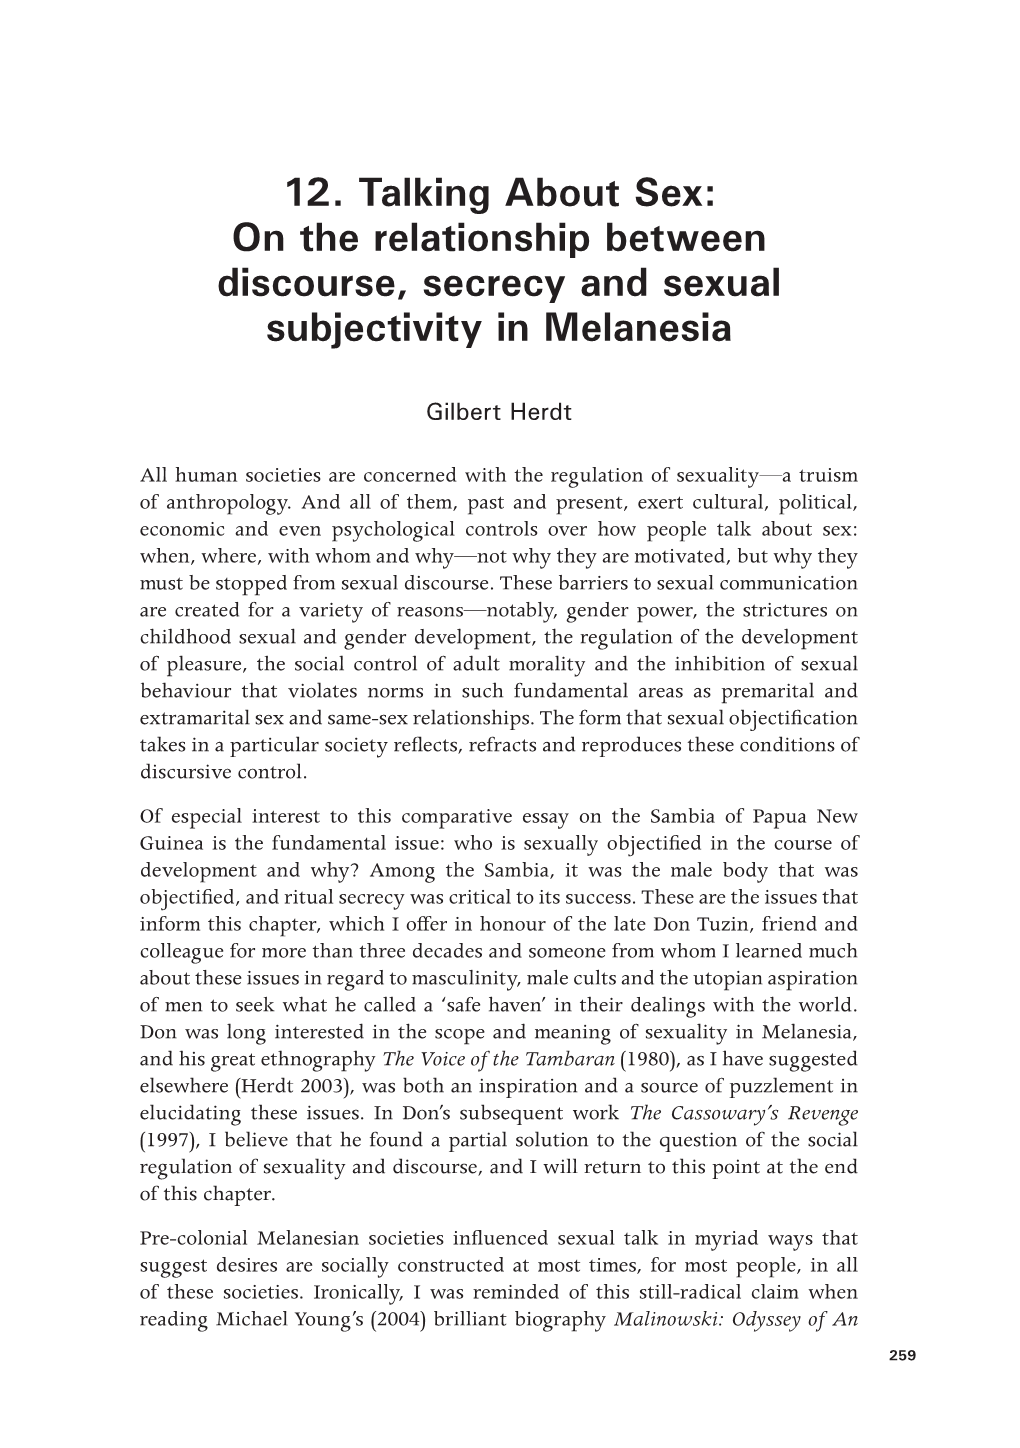 On the Relationship Between Discourse, Secrecy and Sexual Subjectivity in Melanesia